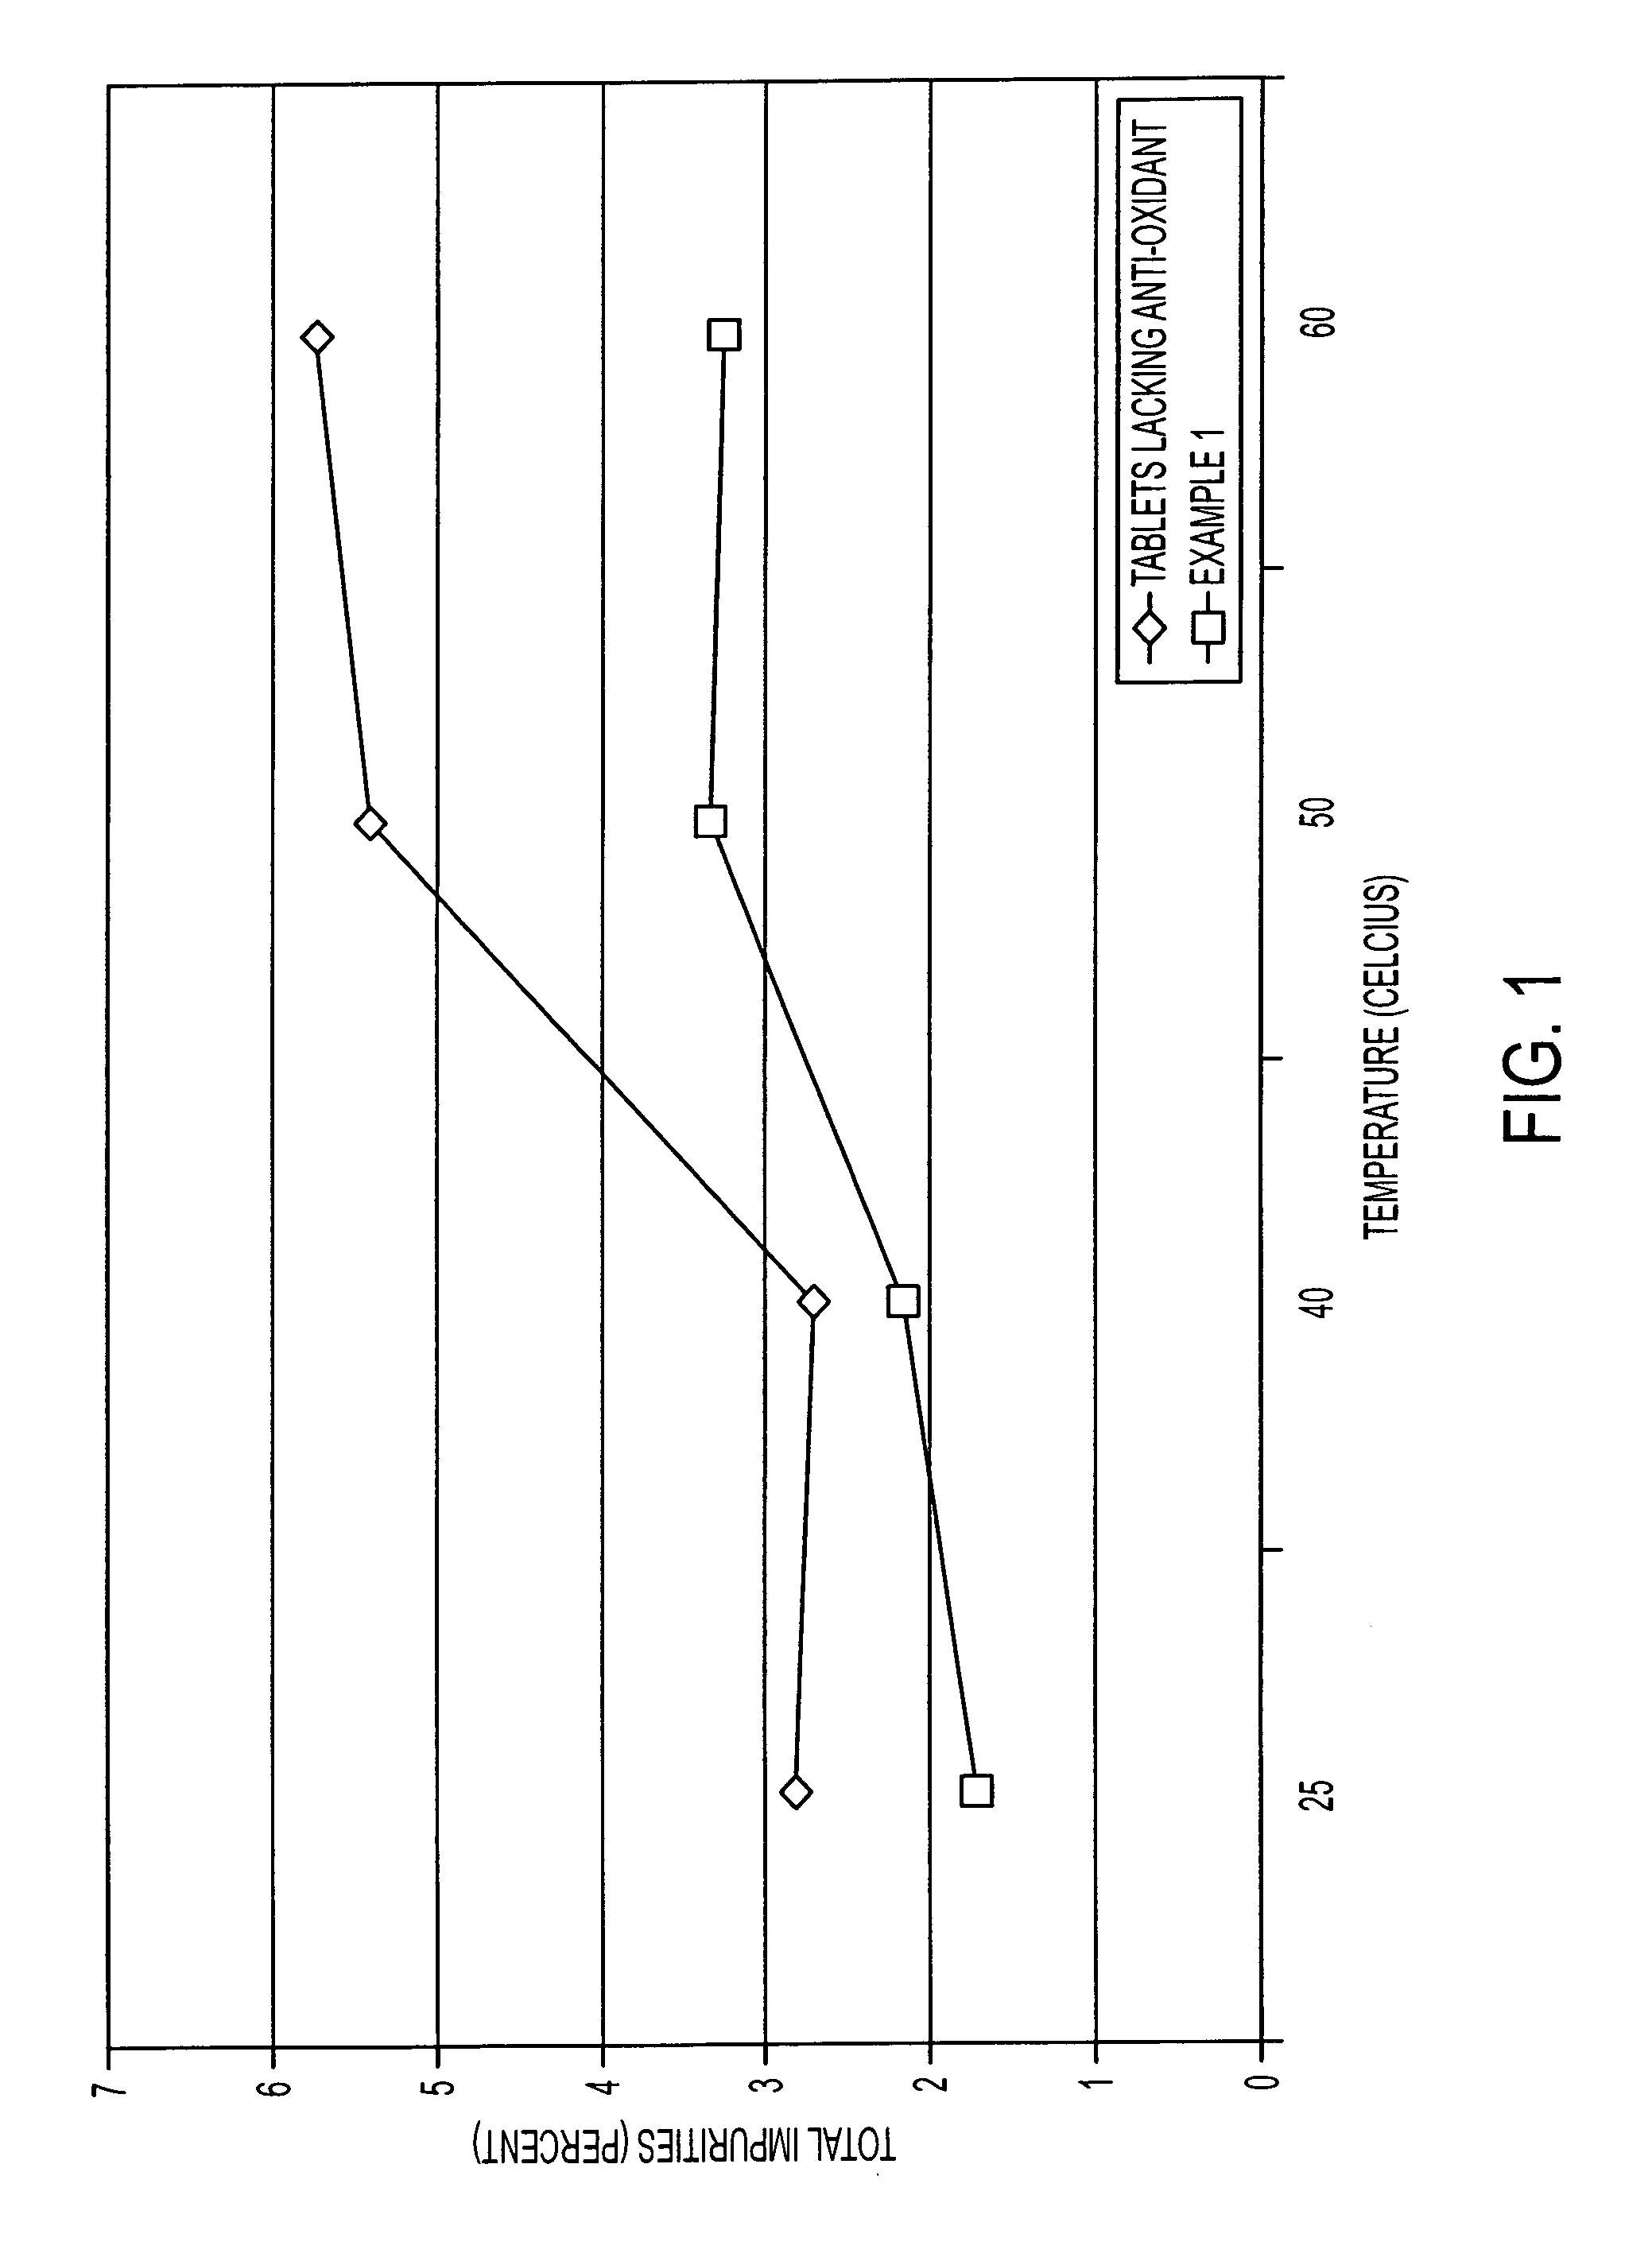 Storage stable thyroxine active drug formulations and methods for their production